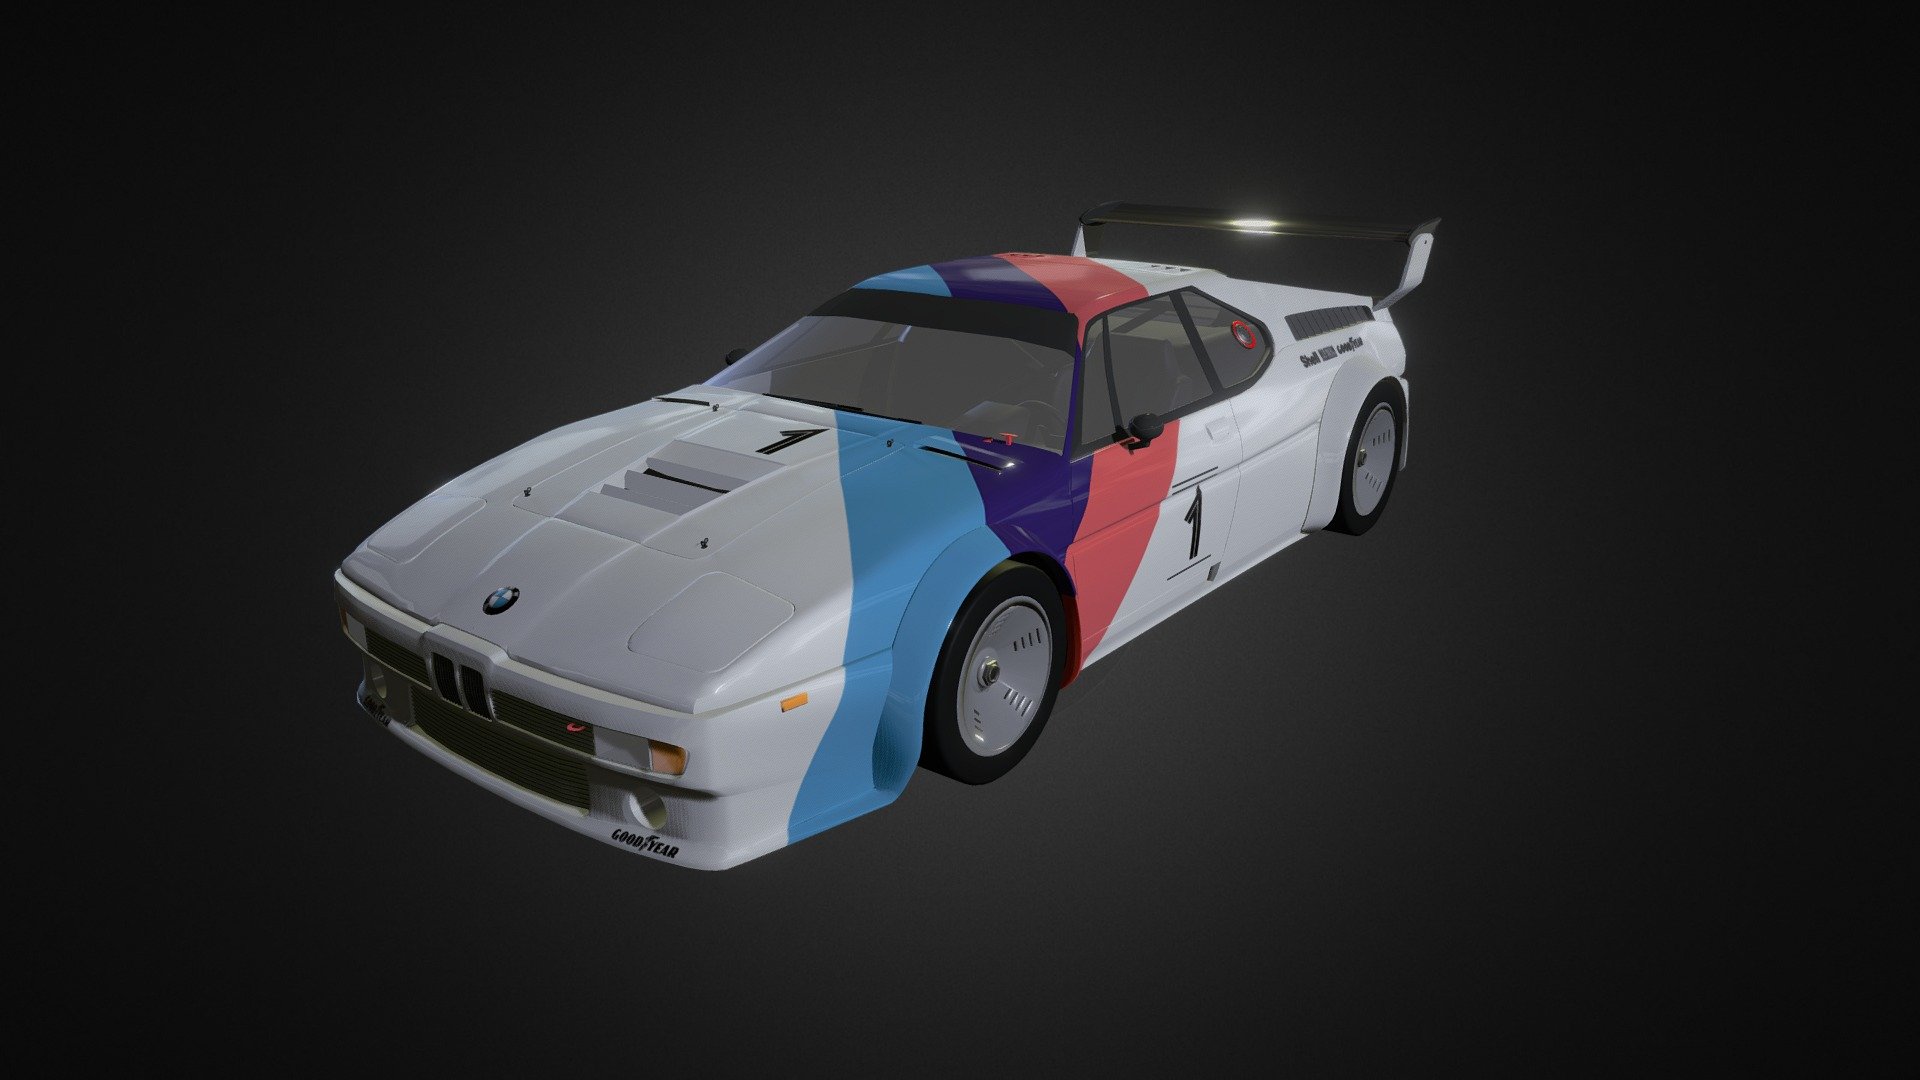 Bmw M1 Procar

The BMW M1 (E26) is a sports car produced by German automaker BMW from 1978 to 1981 3d model